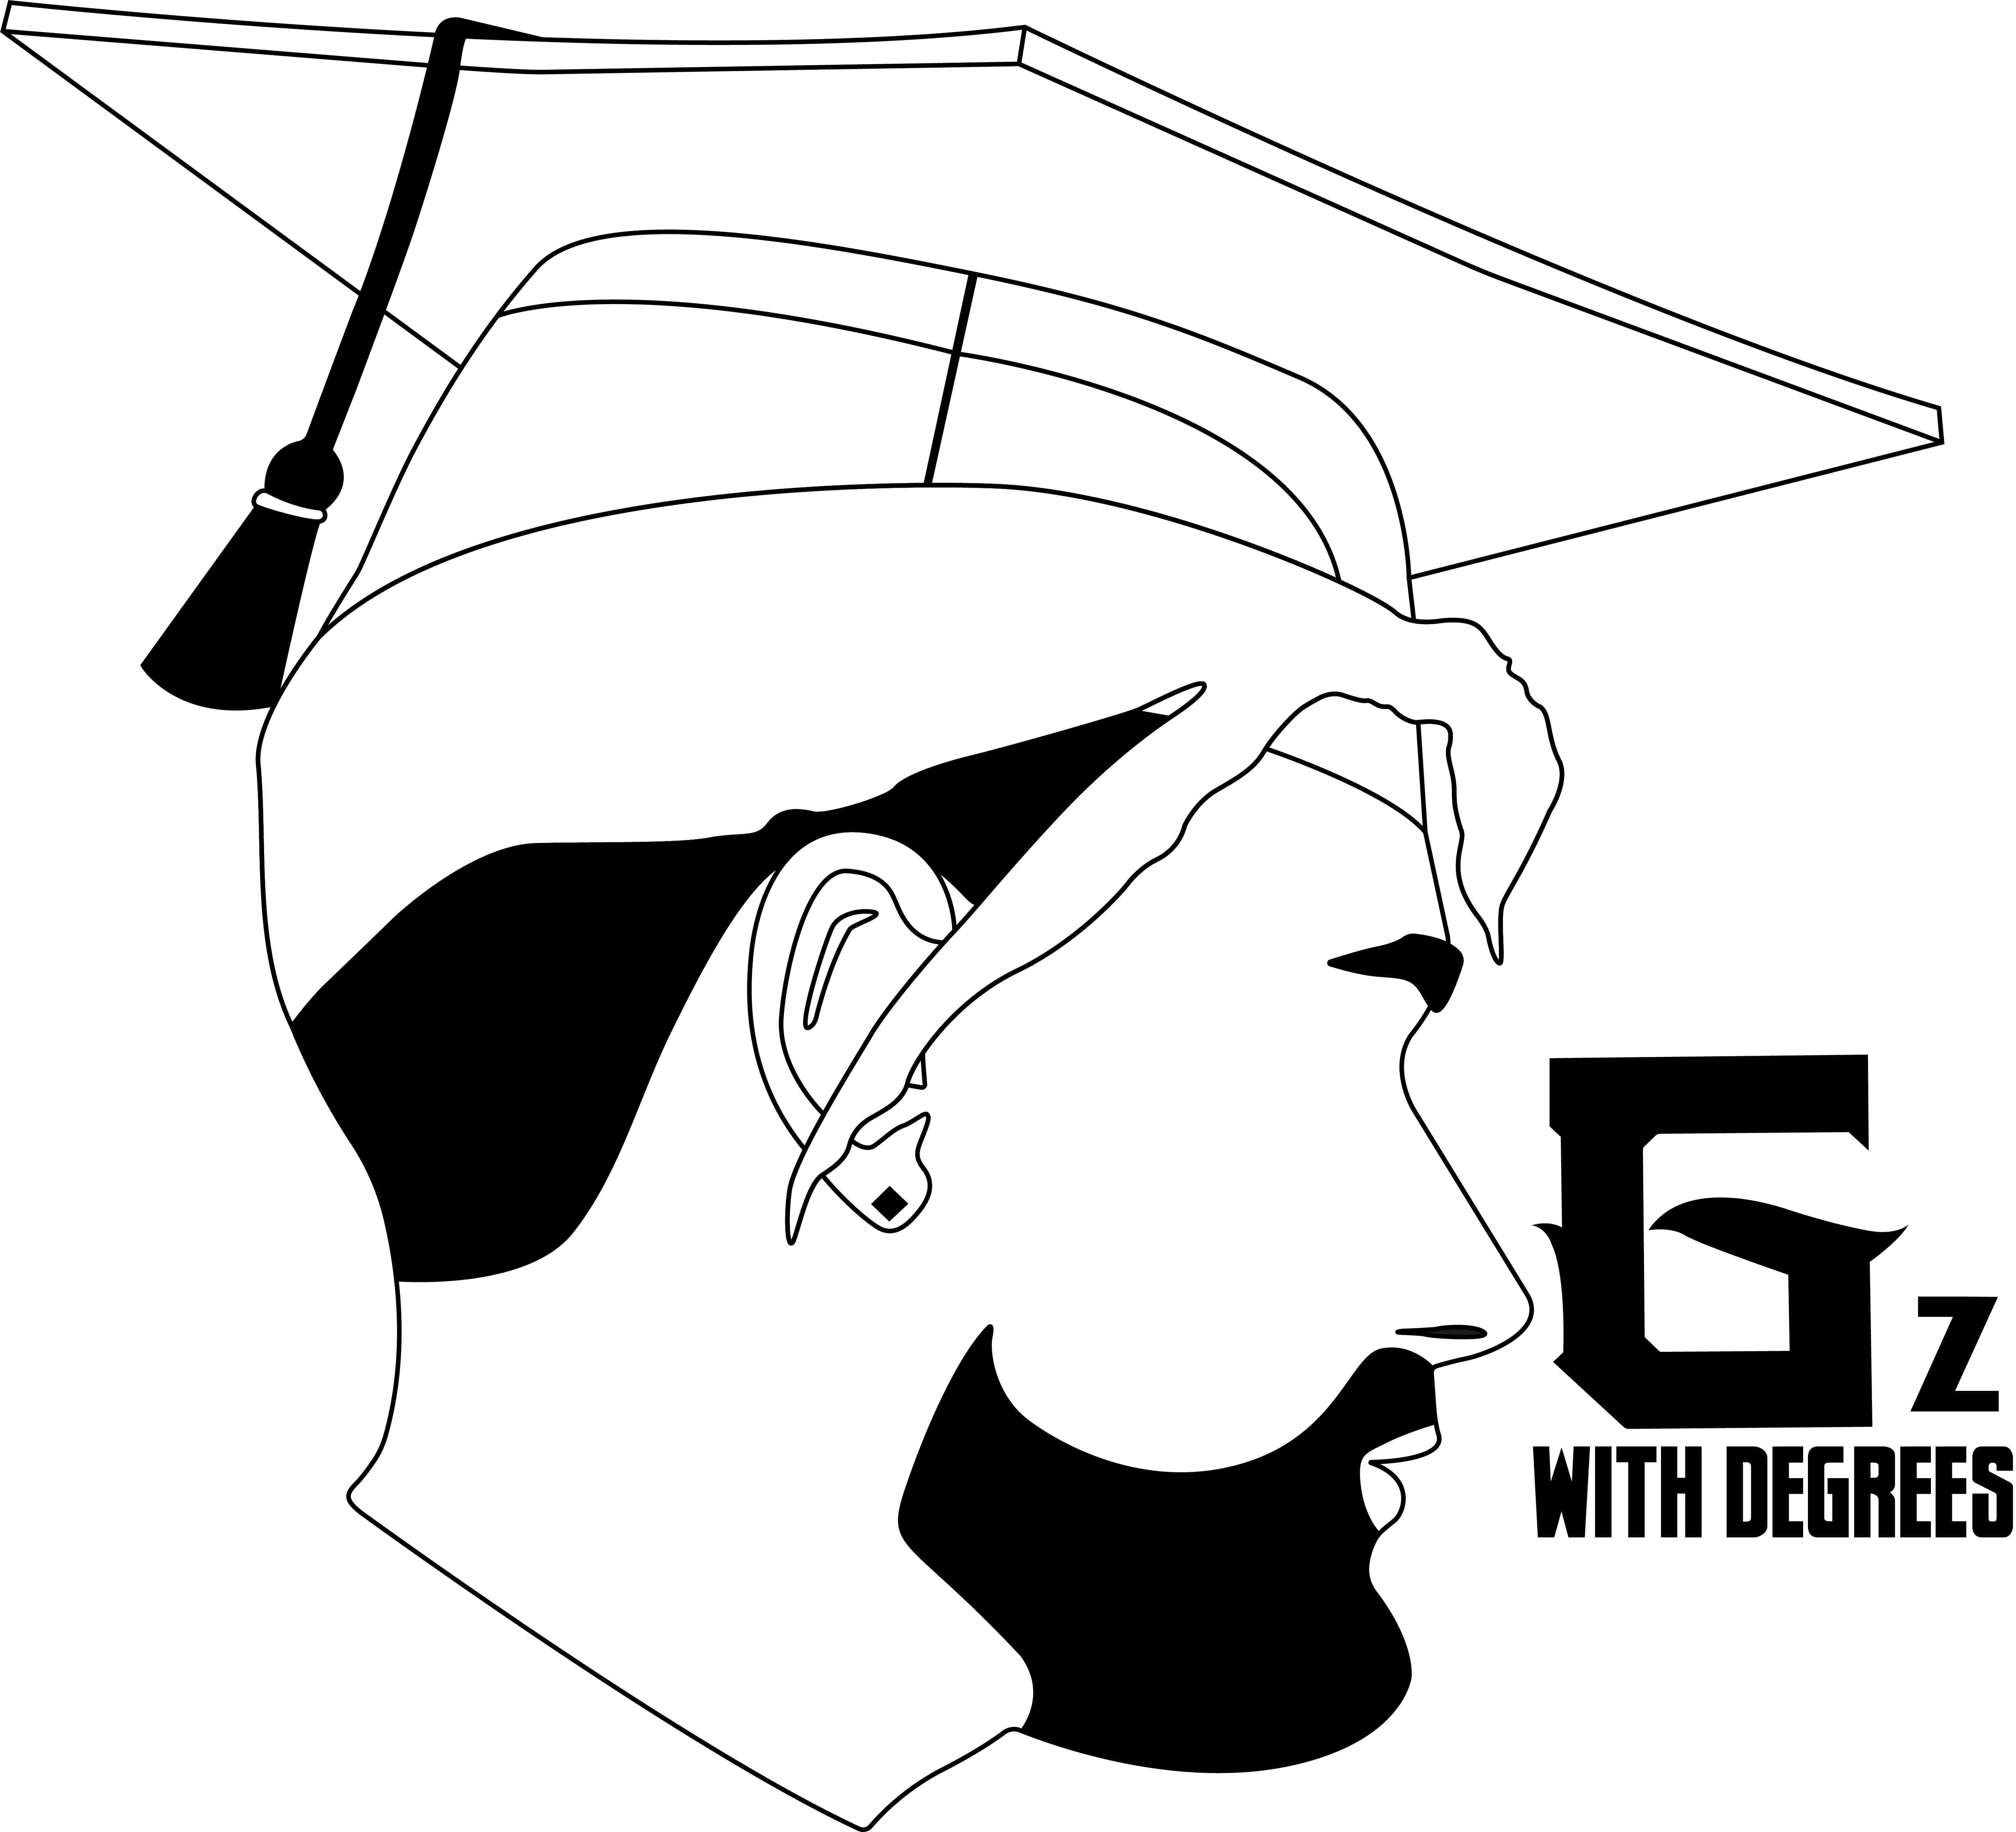  GZWITHDEGREES AND GZWITHDEGREEZ